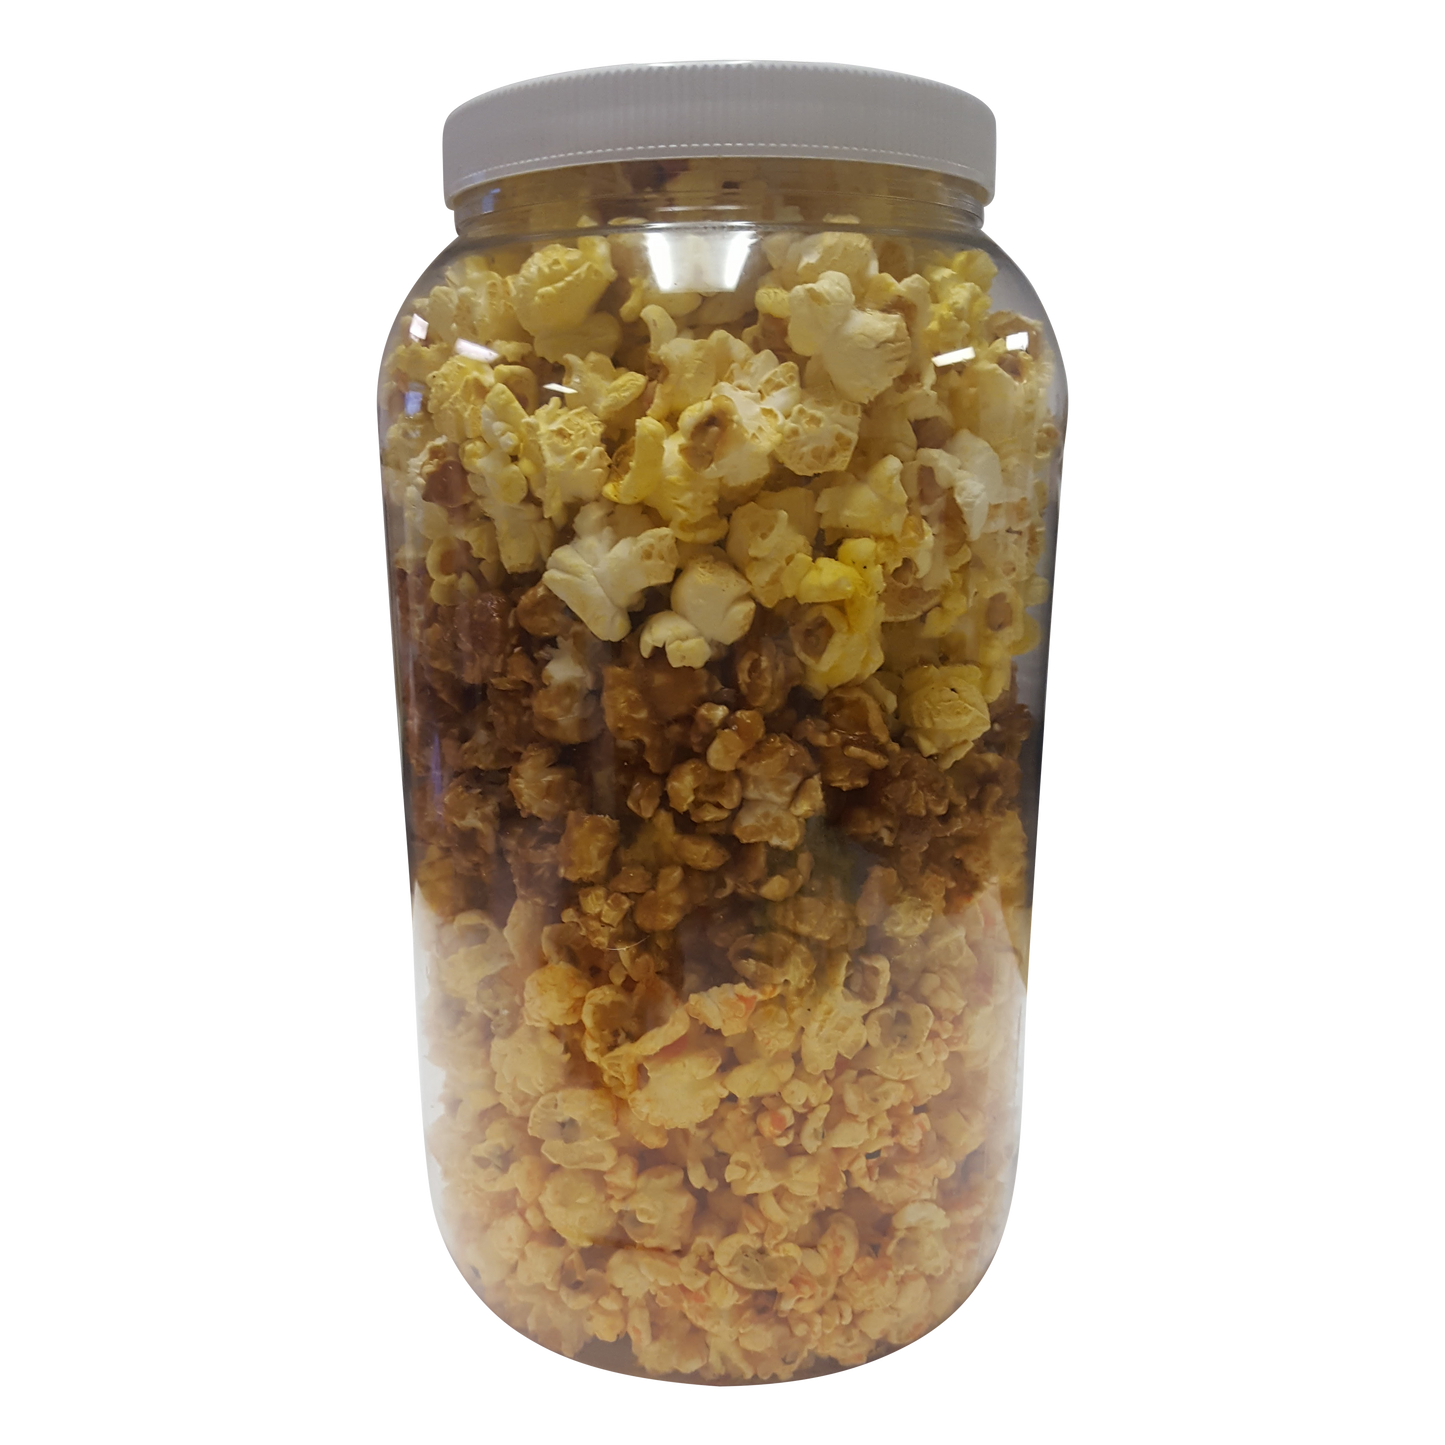 Classic trio Theater Butter, Cheddar Cheese and Caramel Christmas Popcorn 1 Gallon Gift Jar